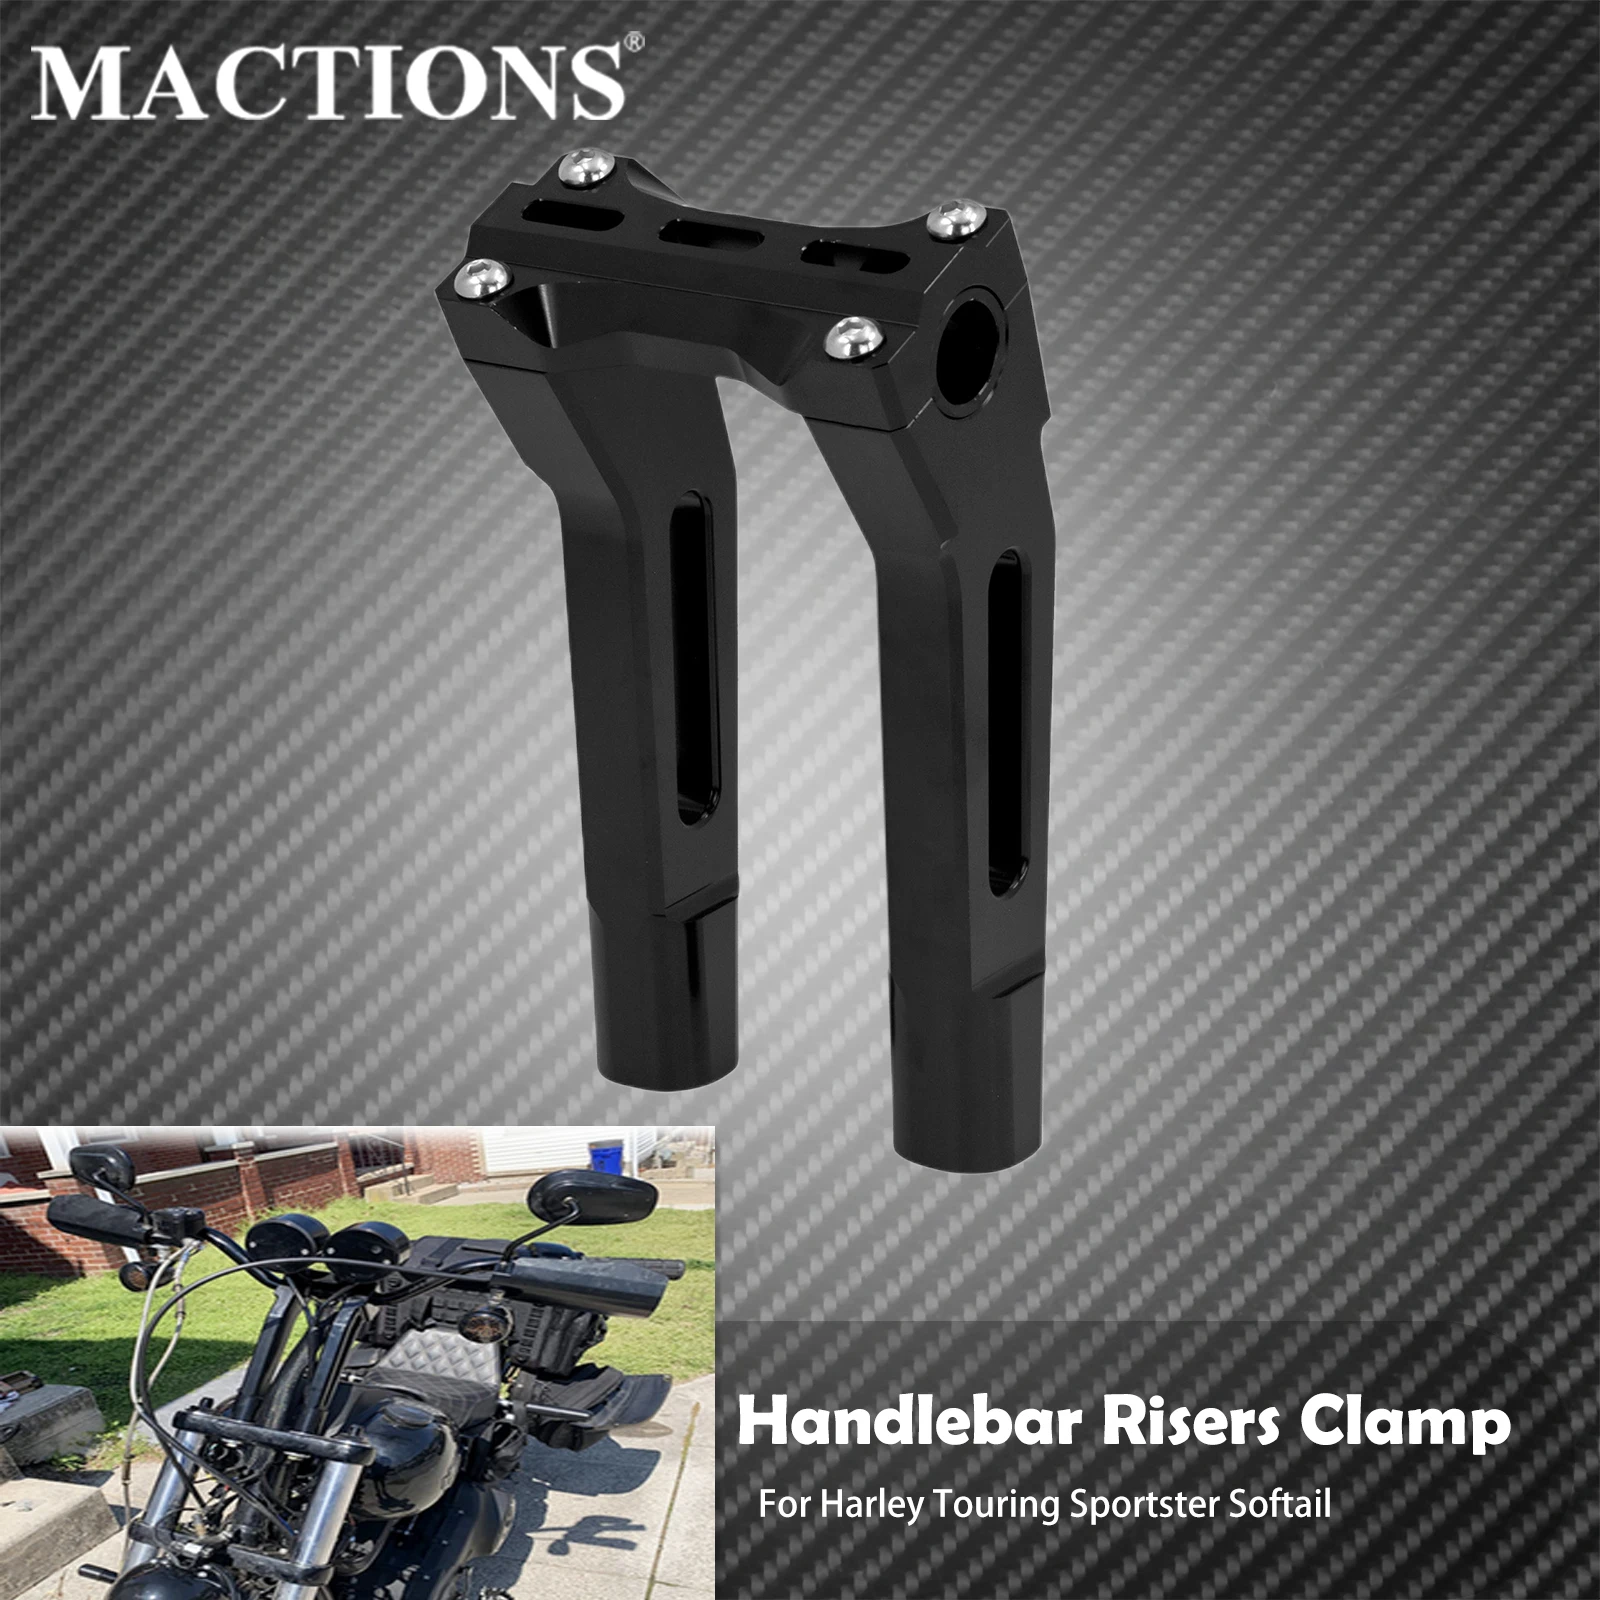 

Motorcycle 10'' Black Handlebar Risers Clamp For Harley Sportster XL883 Touring Street Road Glide Road King Dyna Softail Fatboy